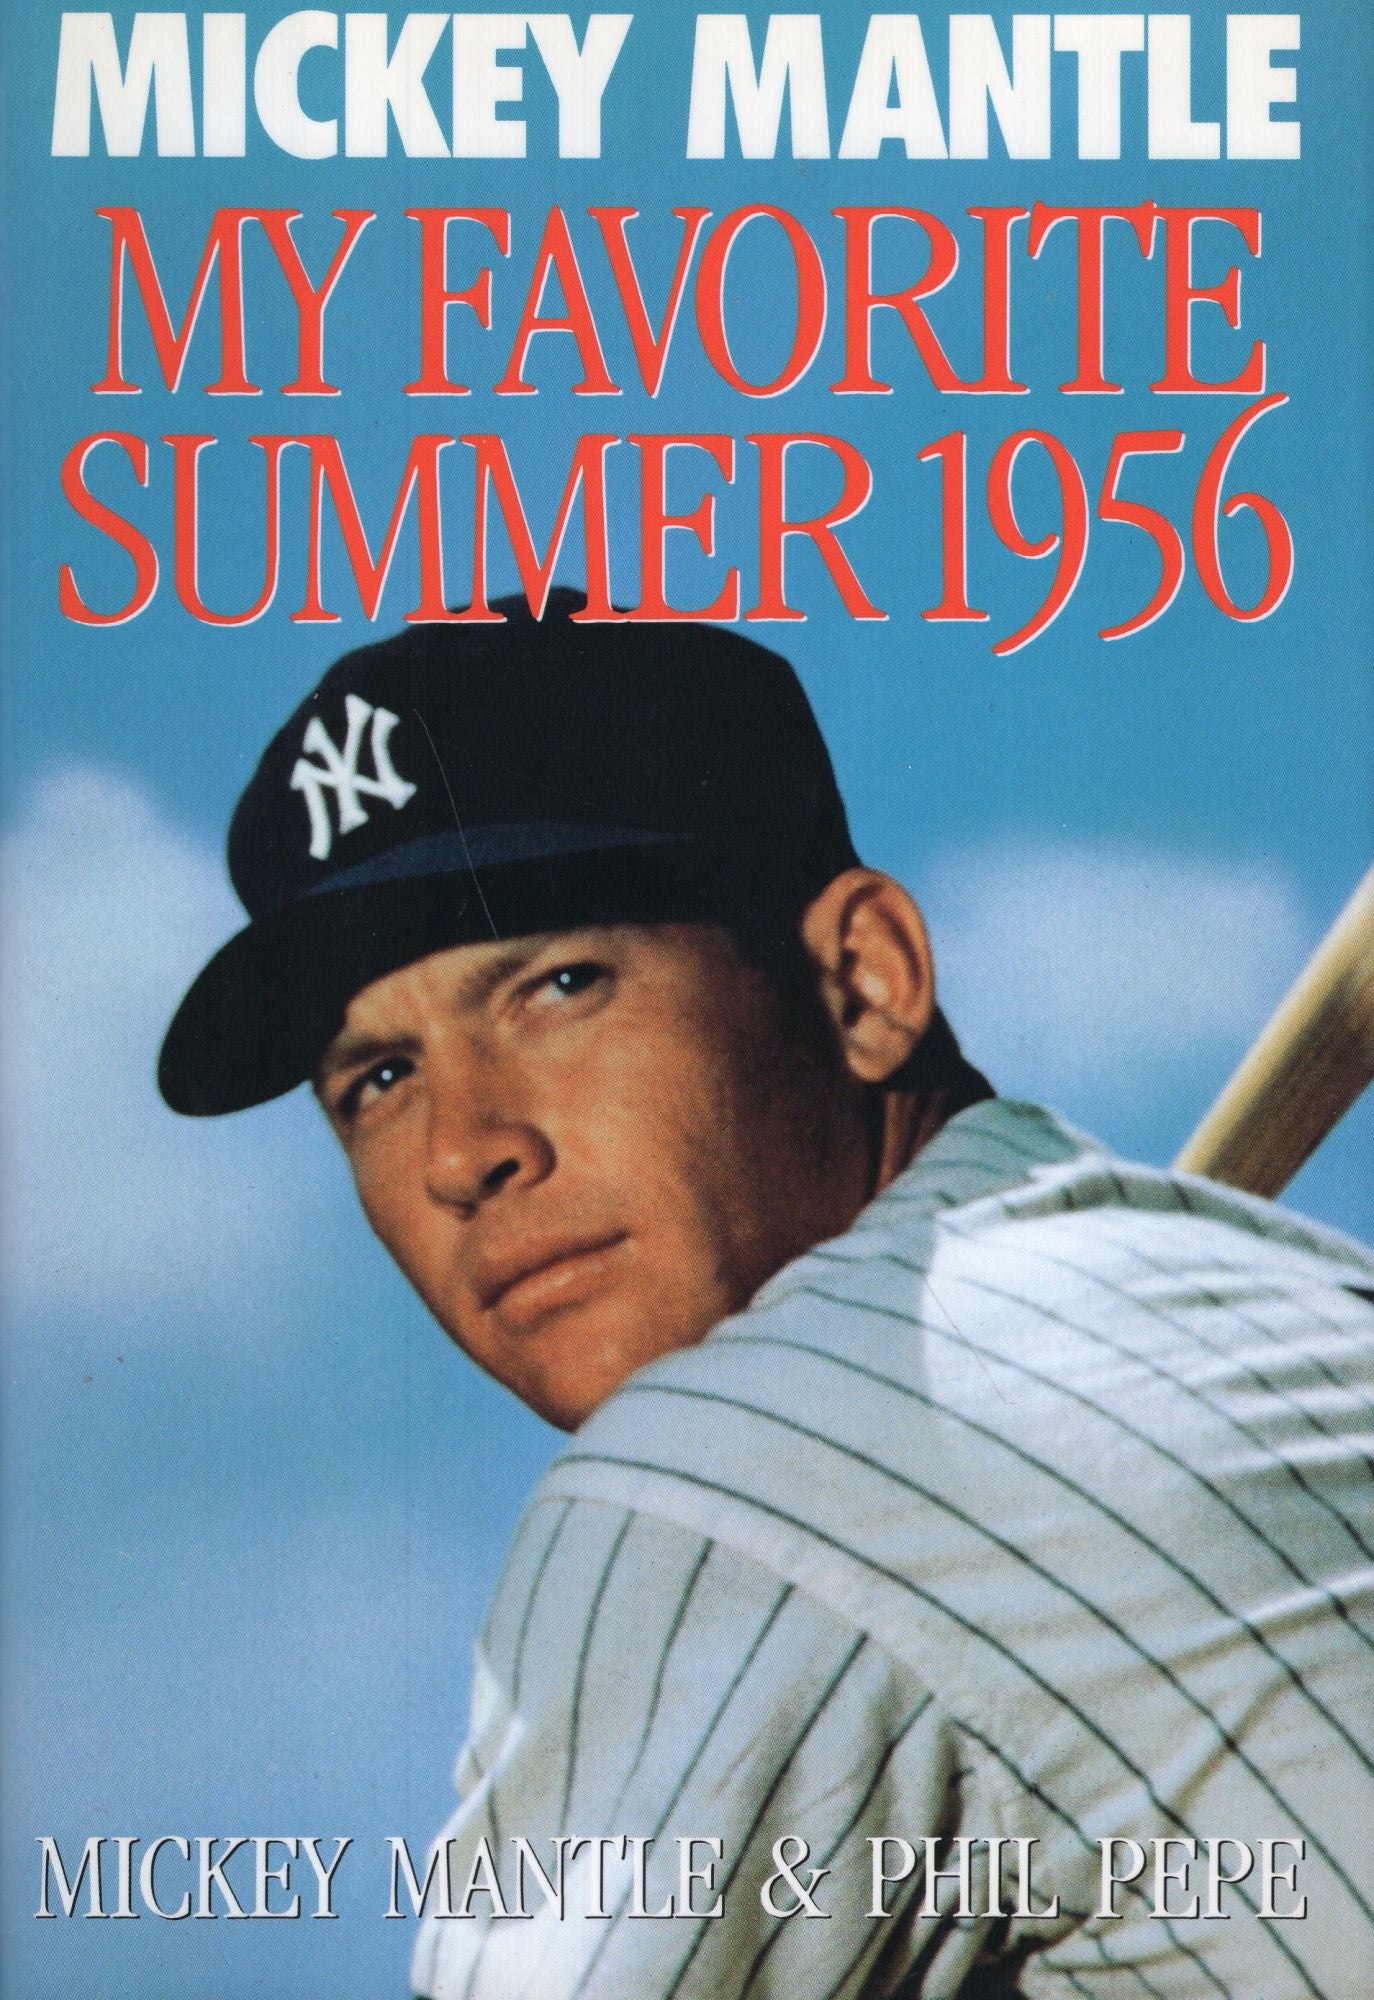 Mickey Mantle Gifts & Merchandise for Sale